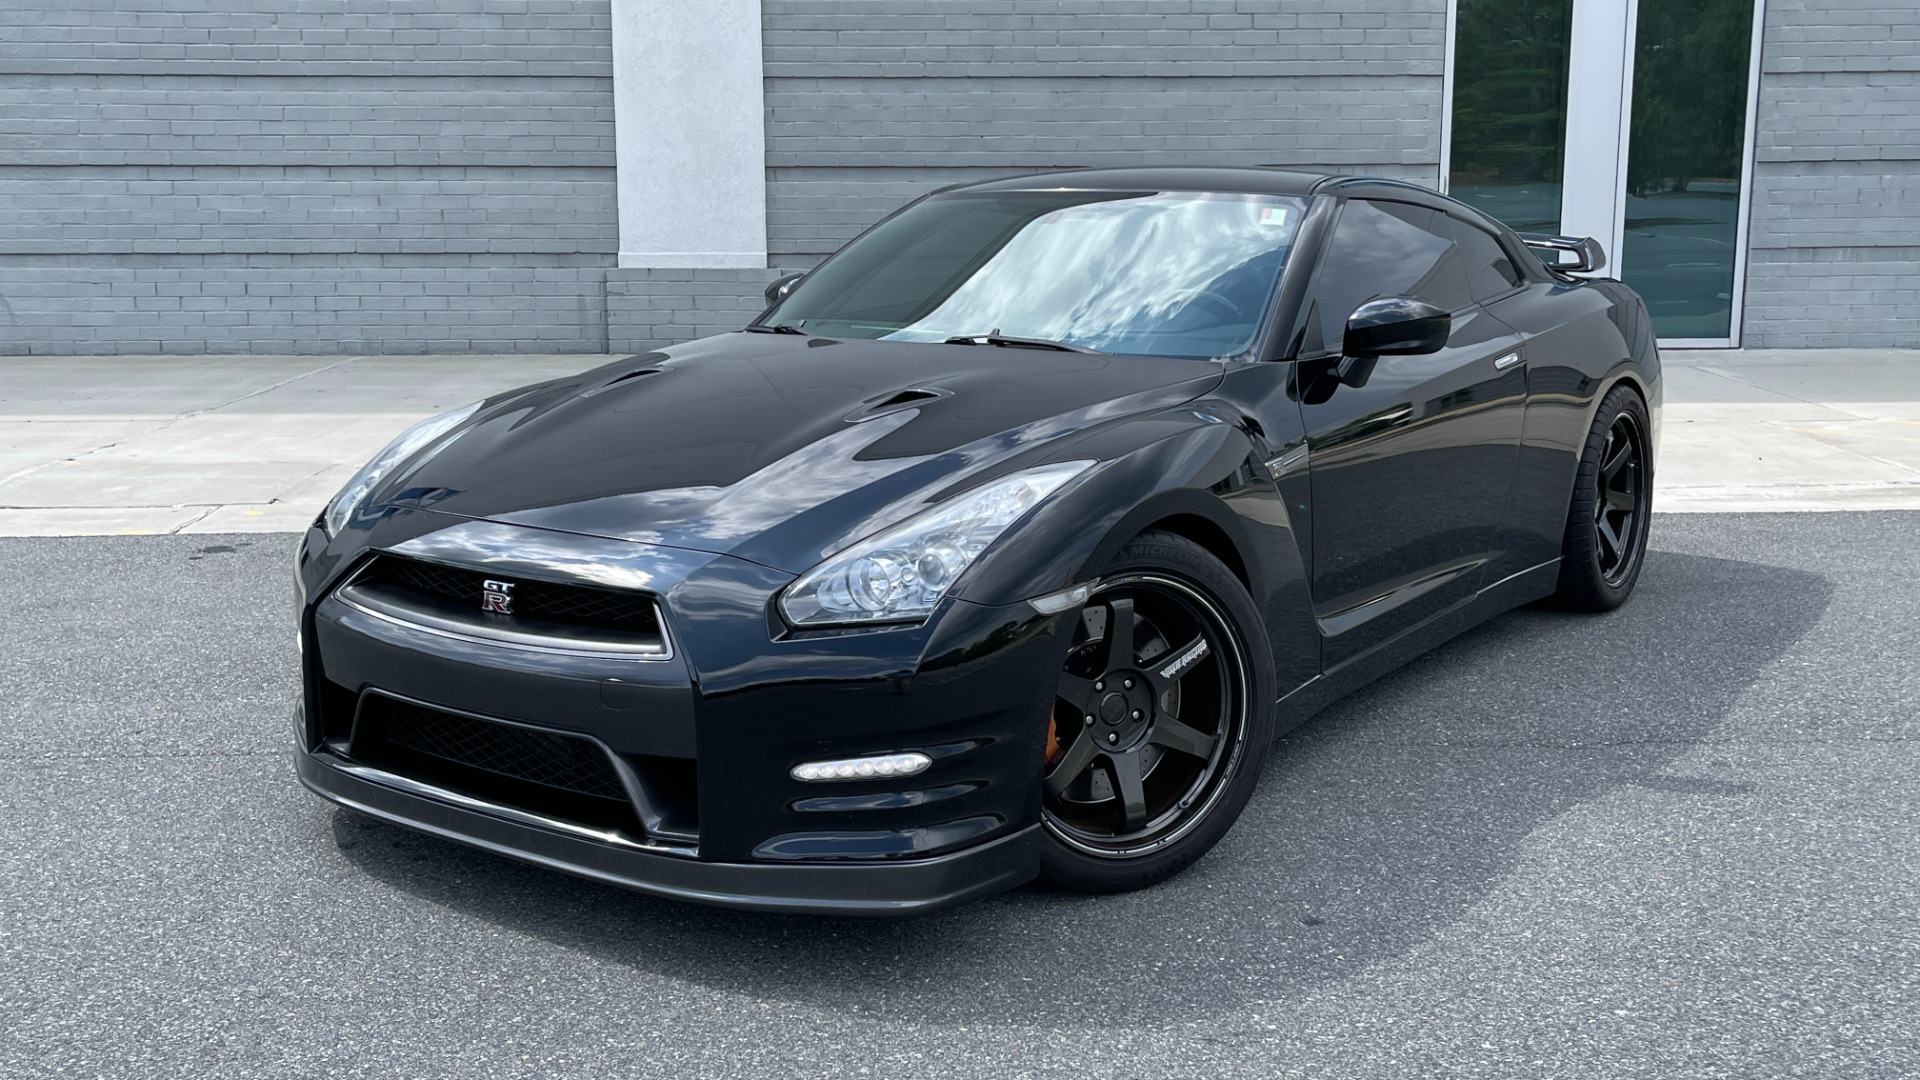 Used 2013 Nissan GT-R PREMIUM COUPE / 3.8L TWIN-TURBO / 6-SPD AUTO / COLD WTHR PKG / CAMERA for sale Sold at Formula Imports in Charlotte NC 28227 3